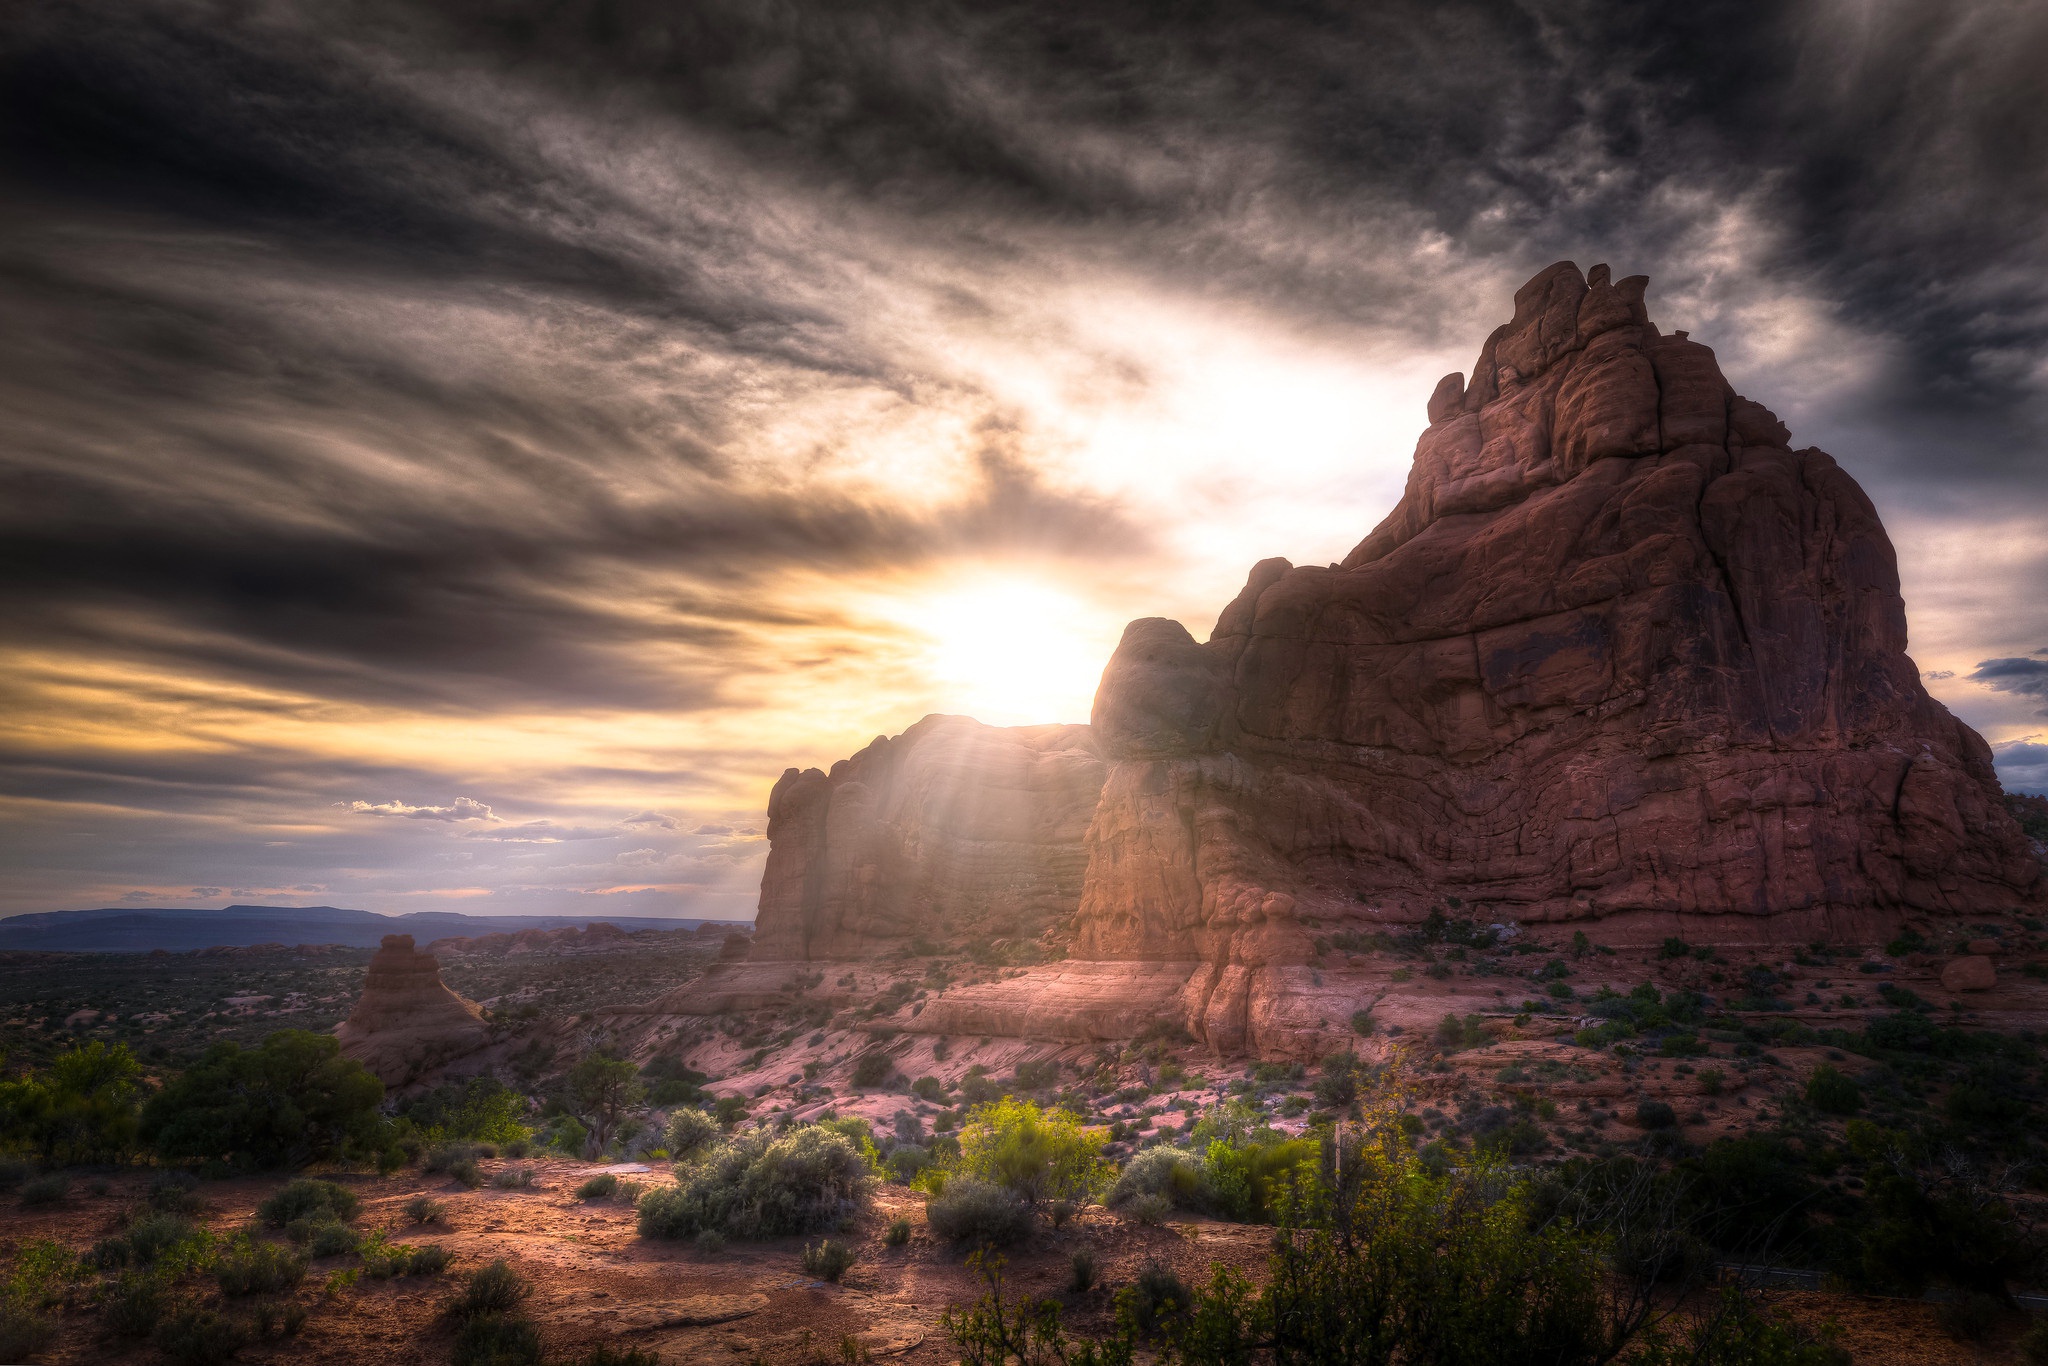 Colorado USA Arches National Park Nature Landscape Rock Rock Formation Shrubbery Sunlight Clouds 2048x1366